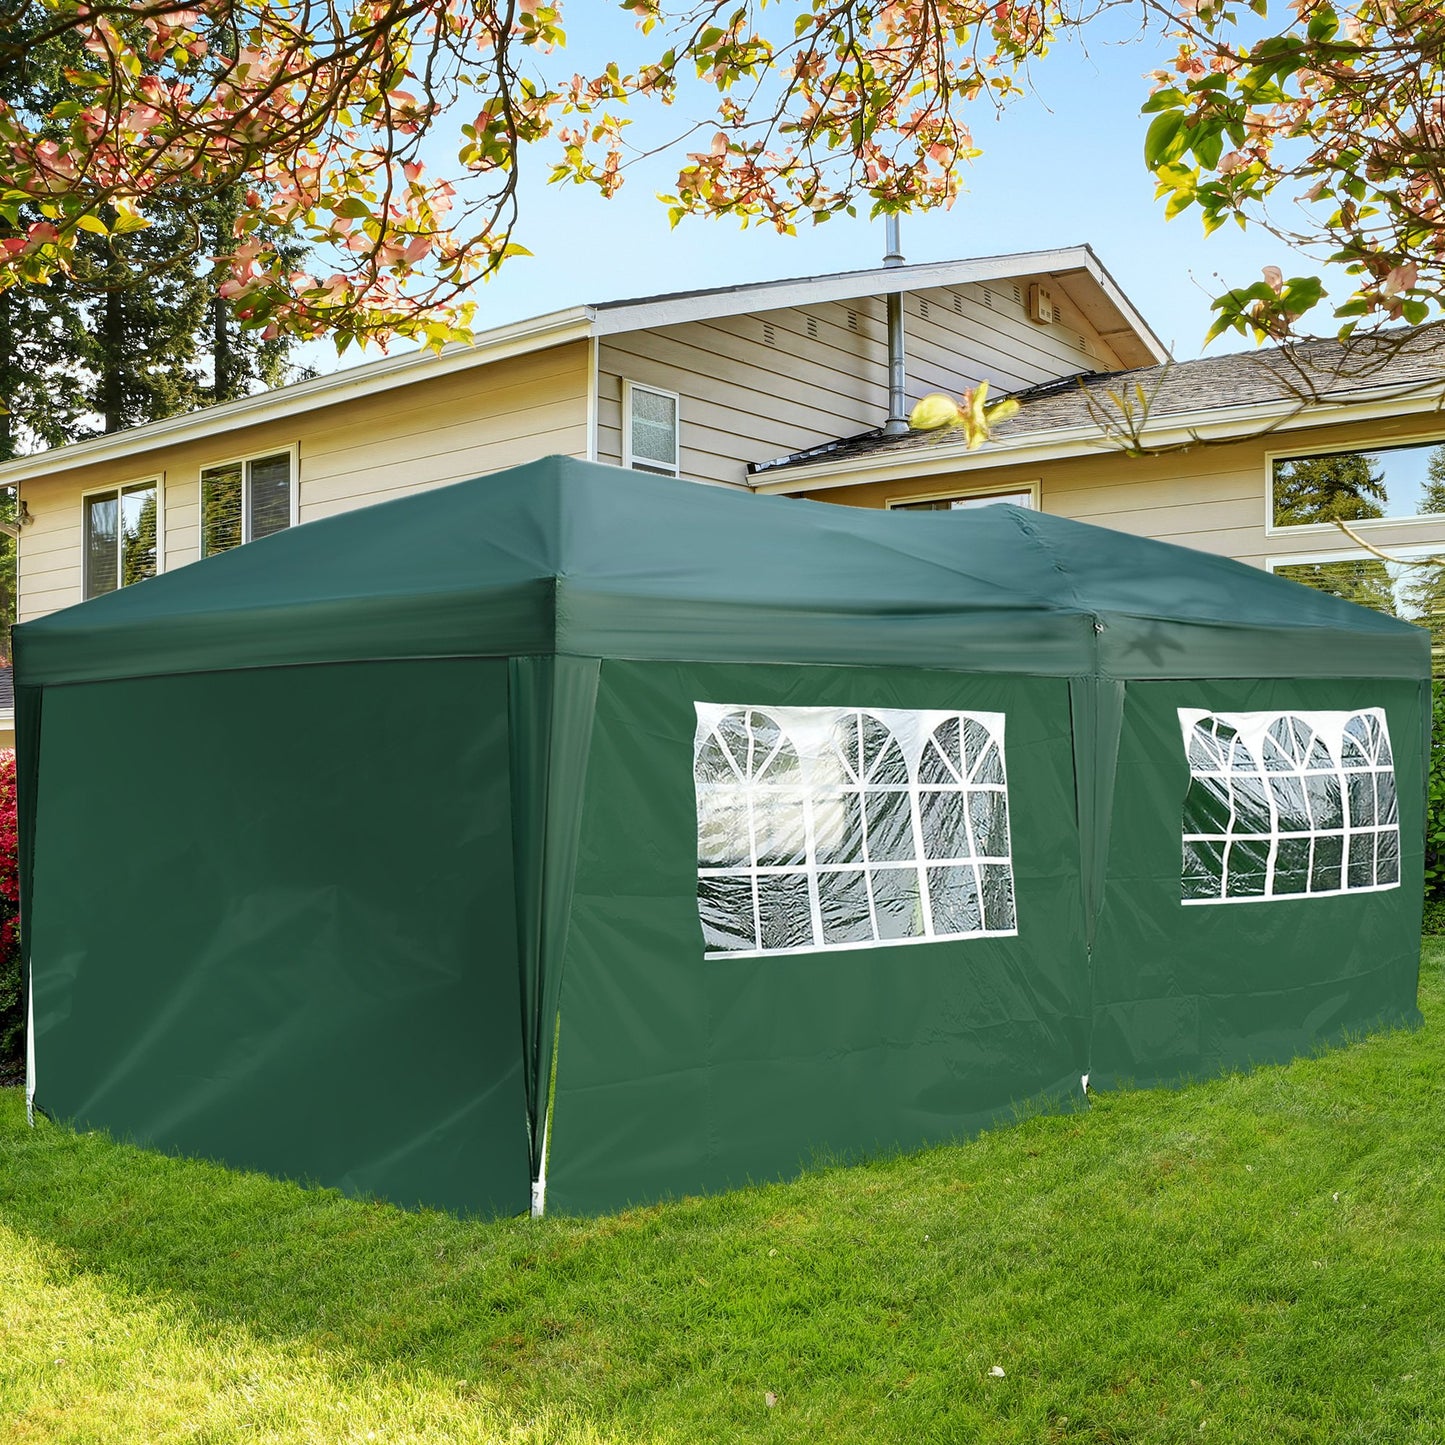 Outsunny 3 x 6m Garden Heavy Duty Water Resistant Pop Up Gazebo Marquee Party Tent Wedding Canopy Awning-Green